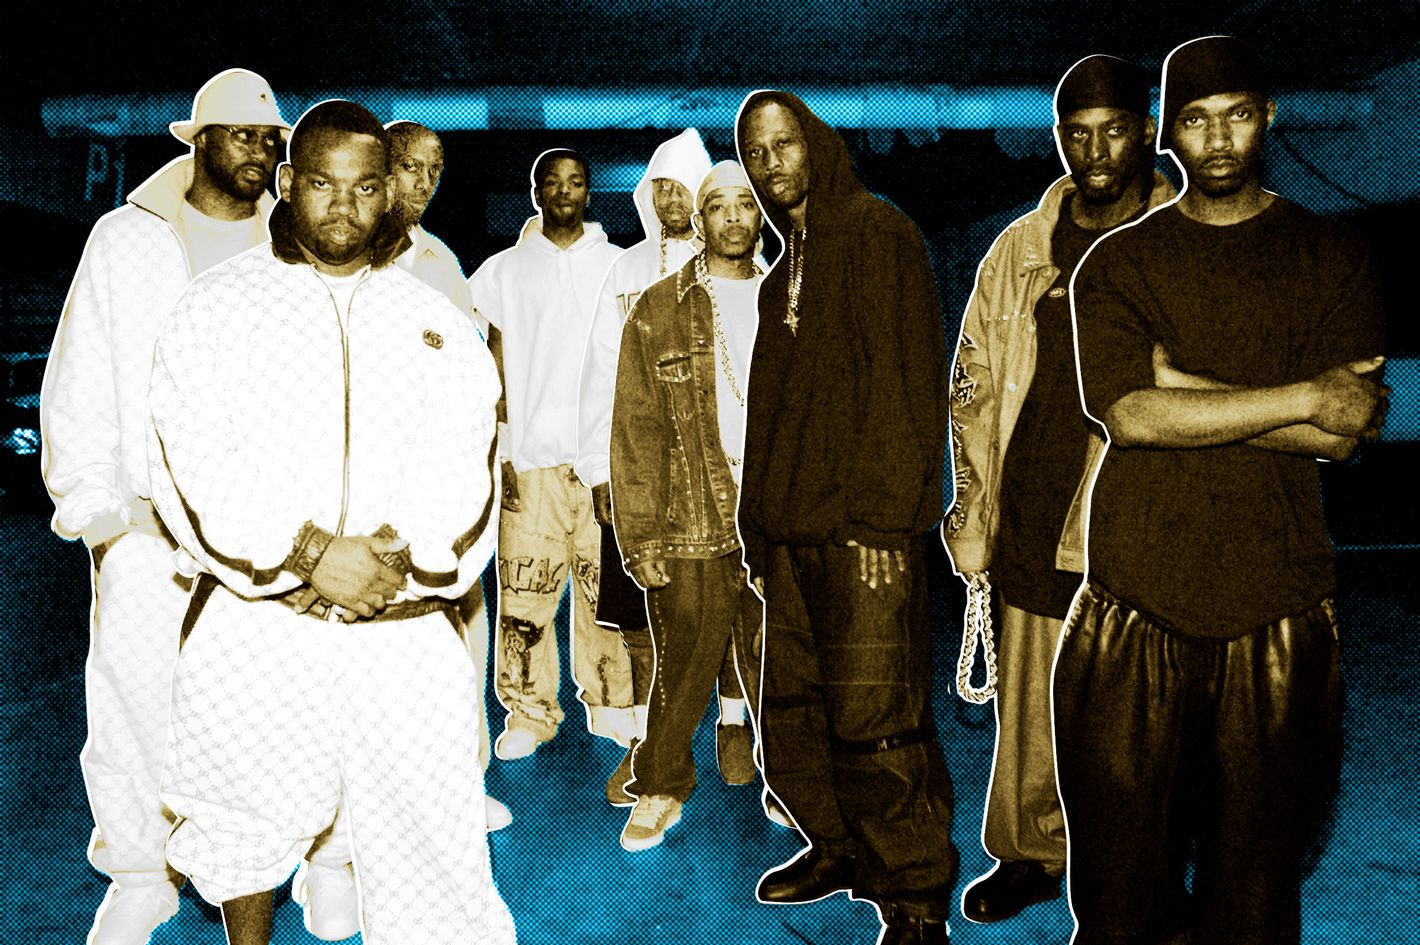 A Comprehensive History of Wu-Tang Clan's Endless Beefs